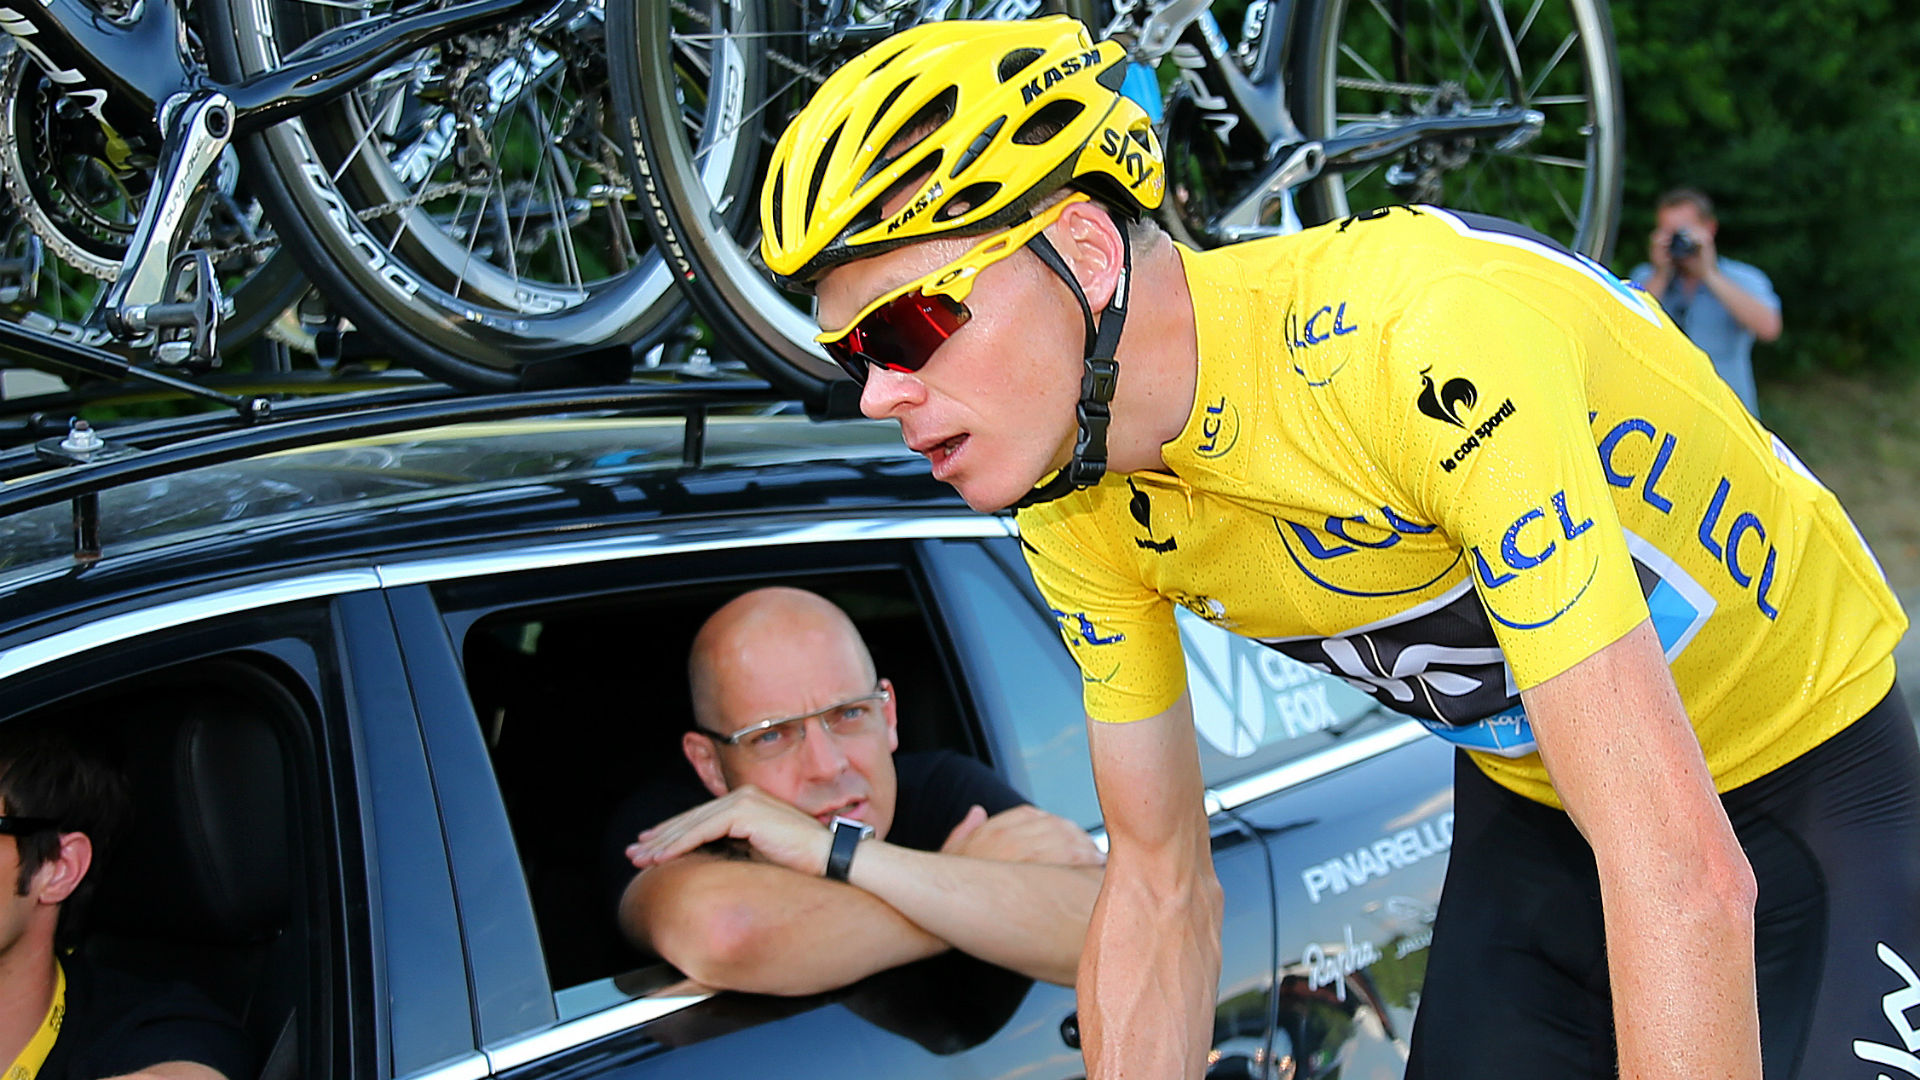 Team Sky and Dave Brailsford have come under fire, but Chris Froome spoke out in their defence on Tuesday.